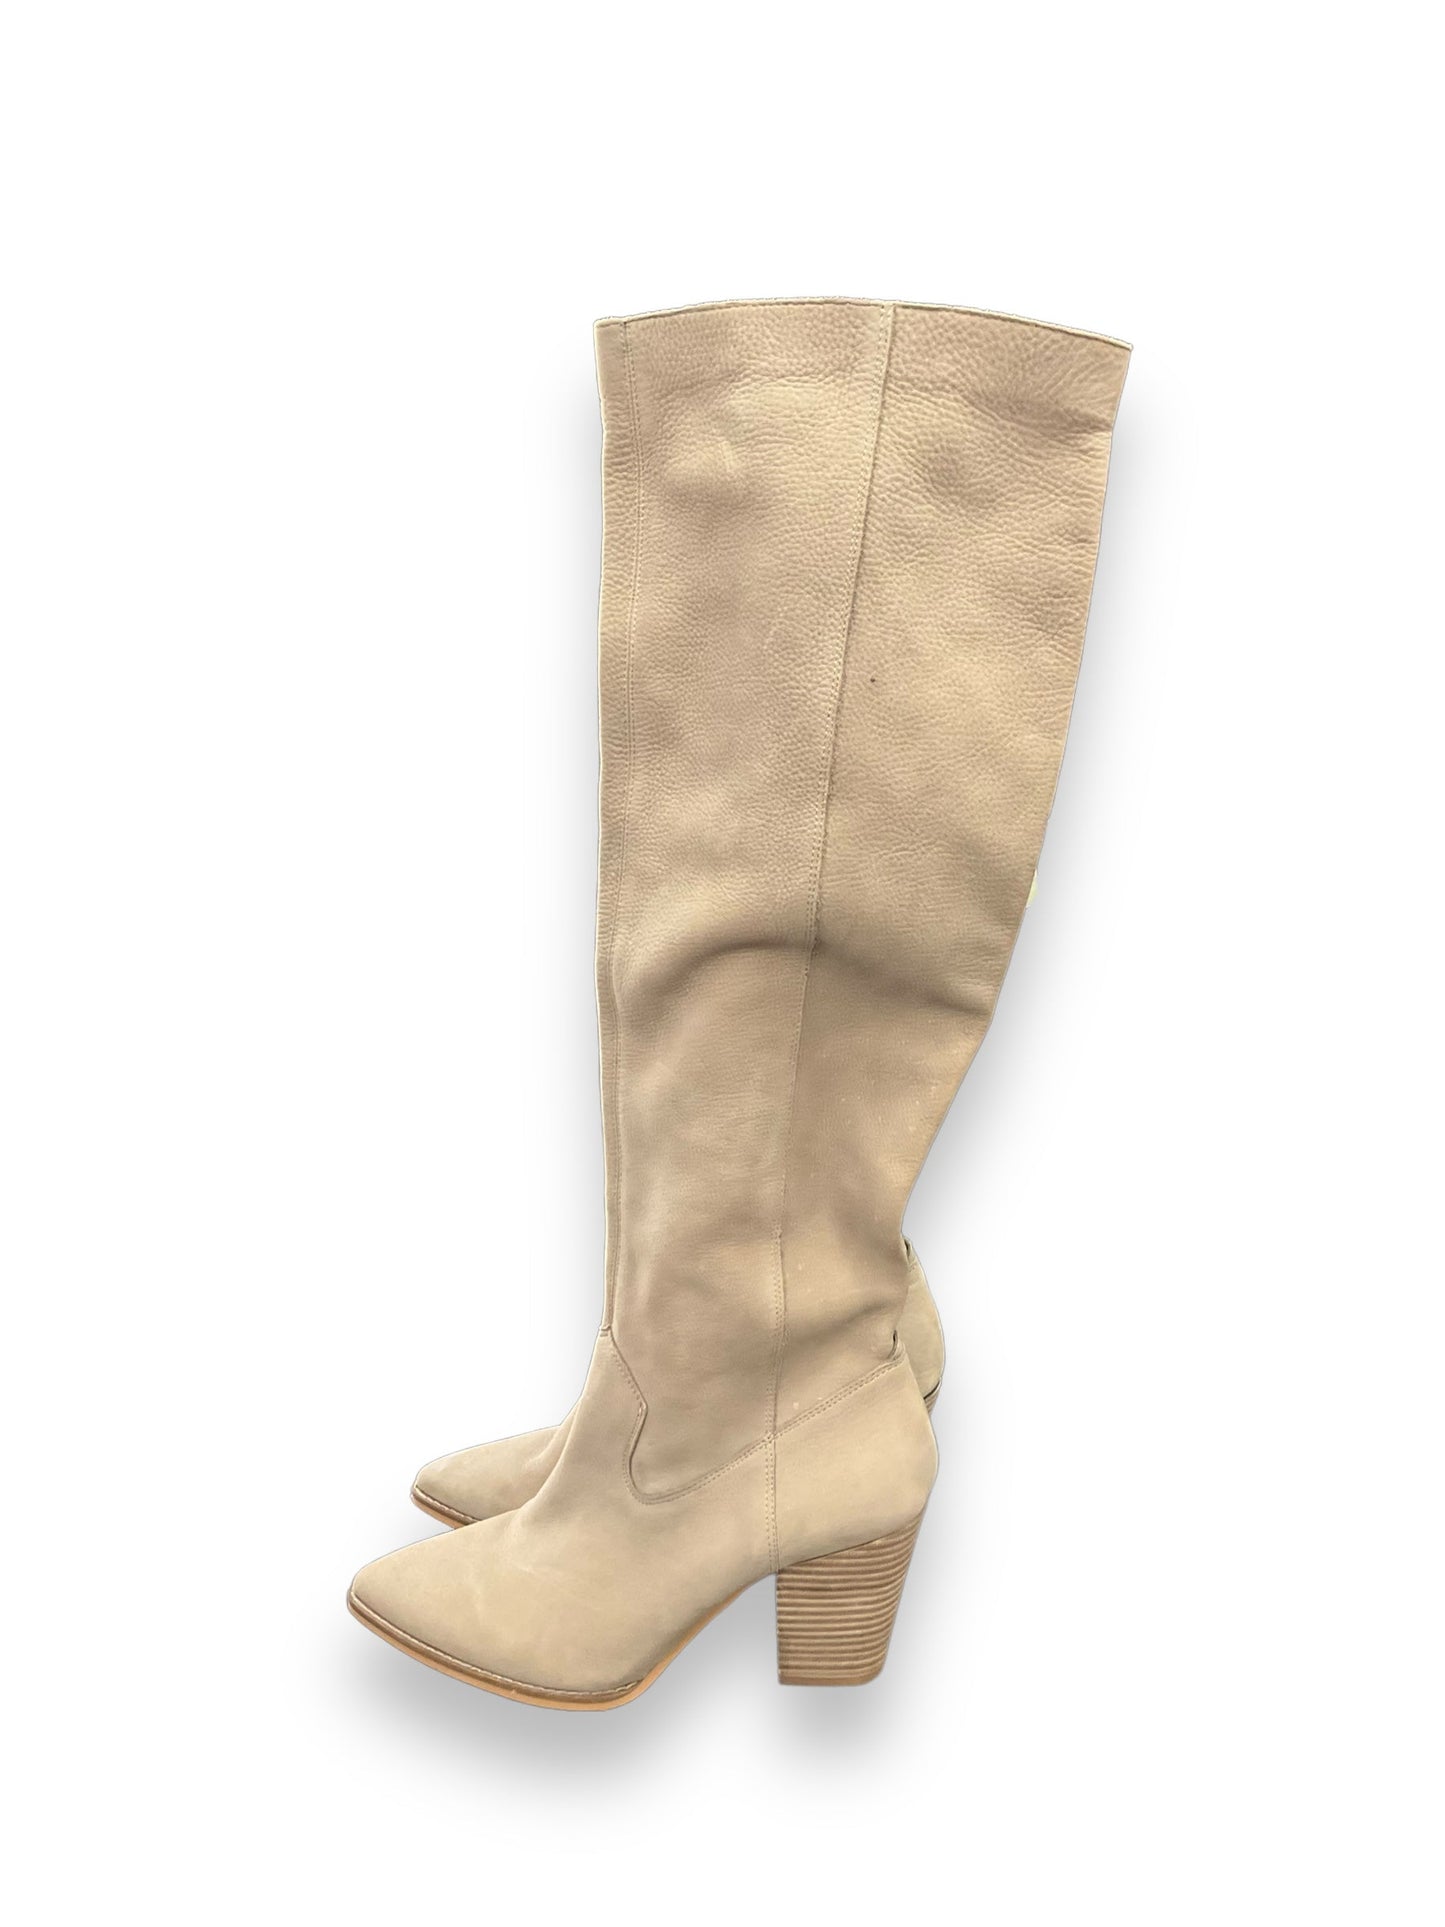 Taupe Boots Knee Heels Lucky Brand, Size 9.5